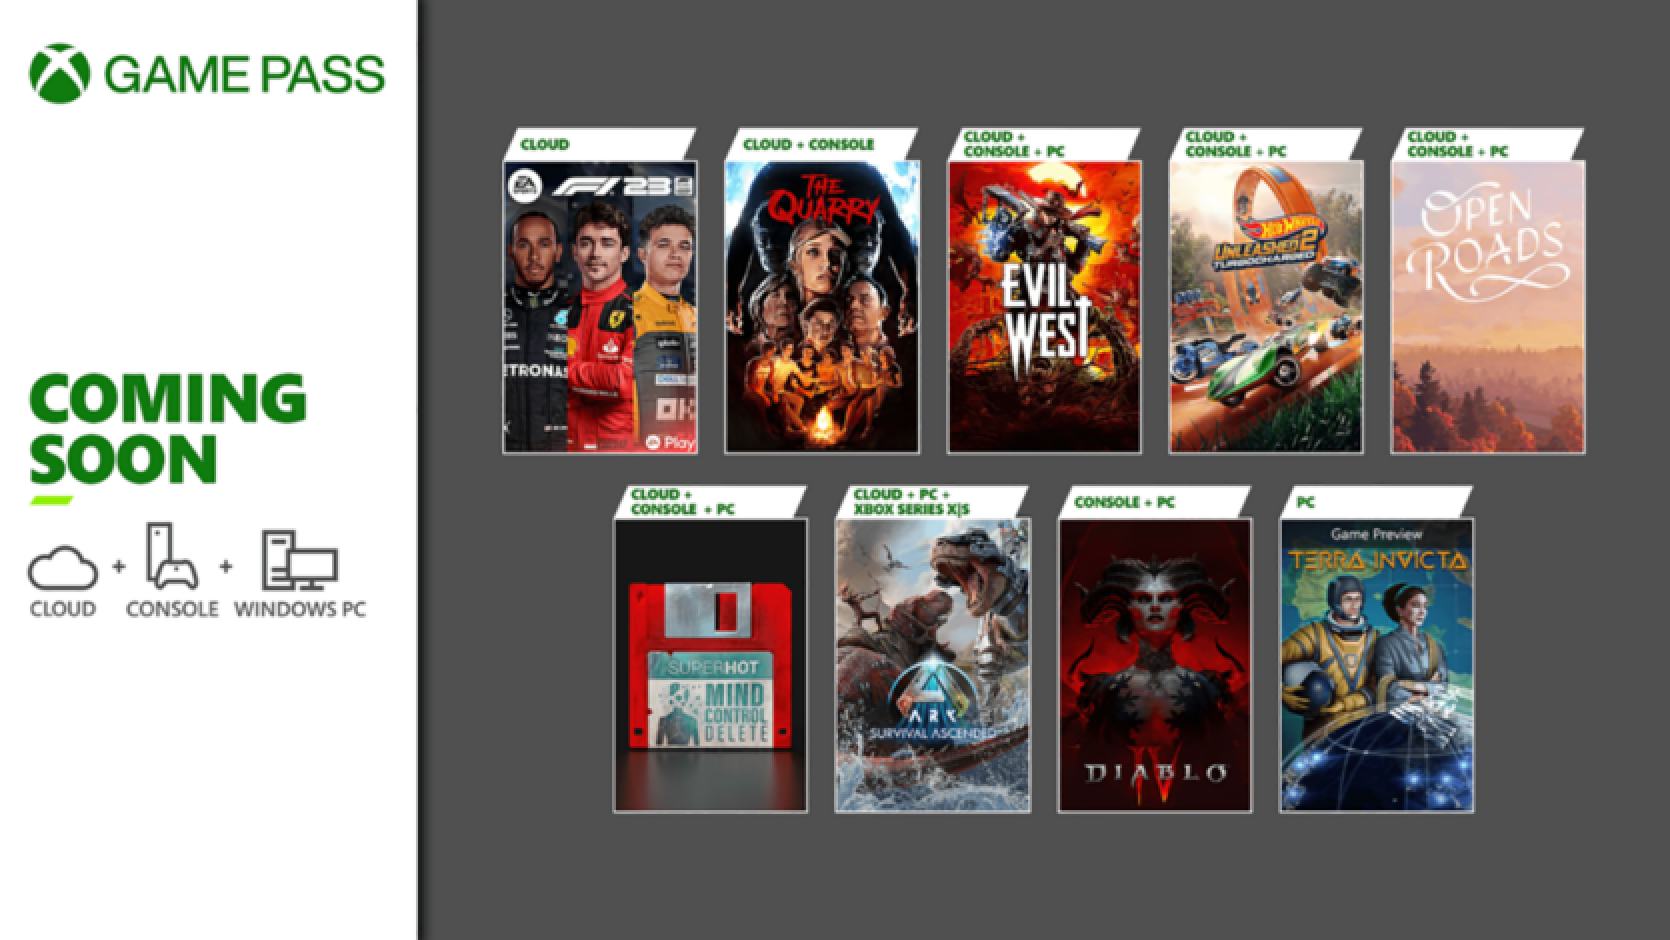 Diablo IV, The Quarry, Ark: Survival Ascended, F1 23 and more games will become available on Xbox Game Pass